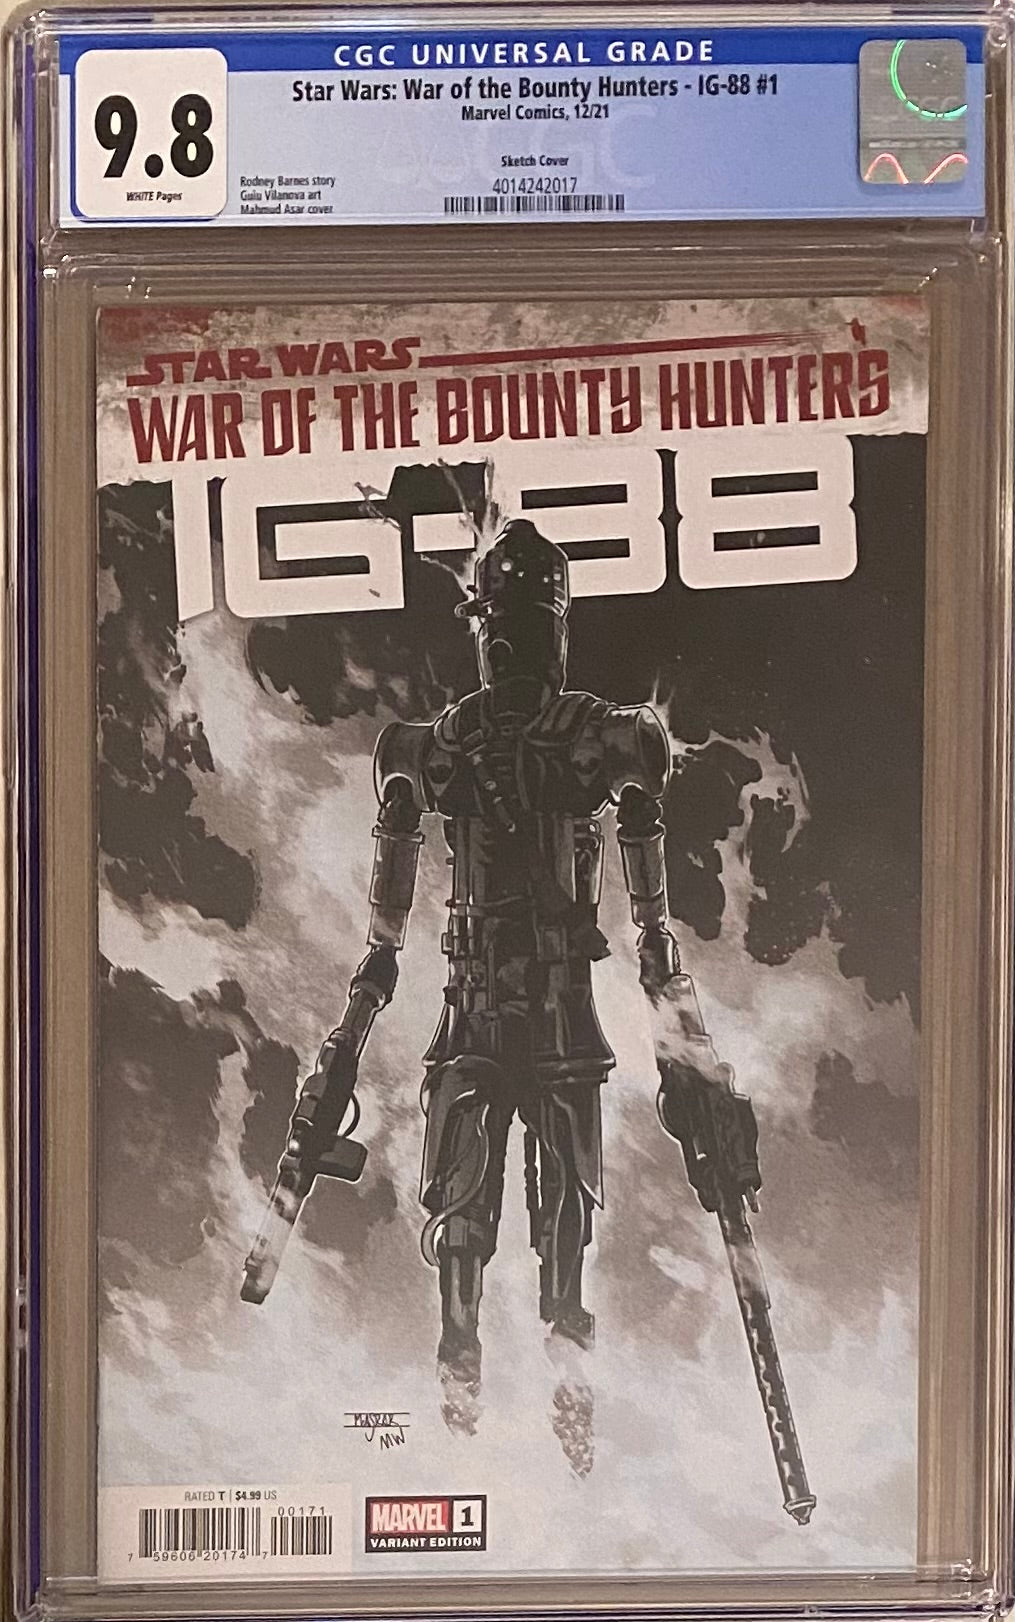 Star Wars: War of the Bounty Hunters - IG-88 #1 Carbonite Variant CGC 9.8